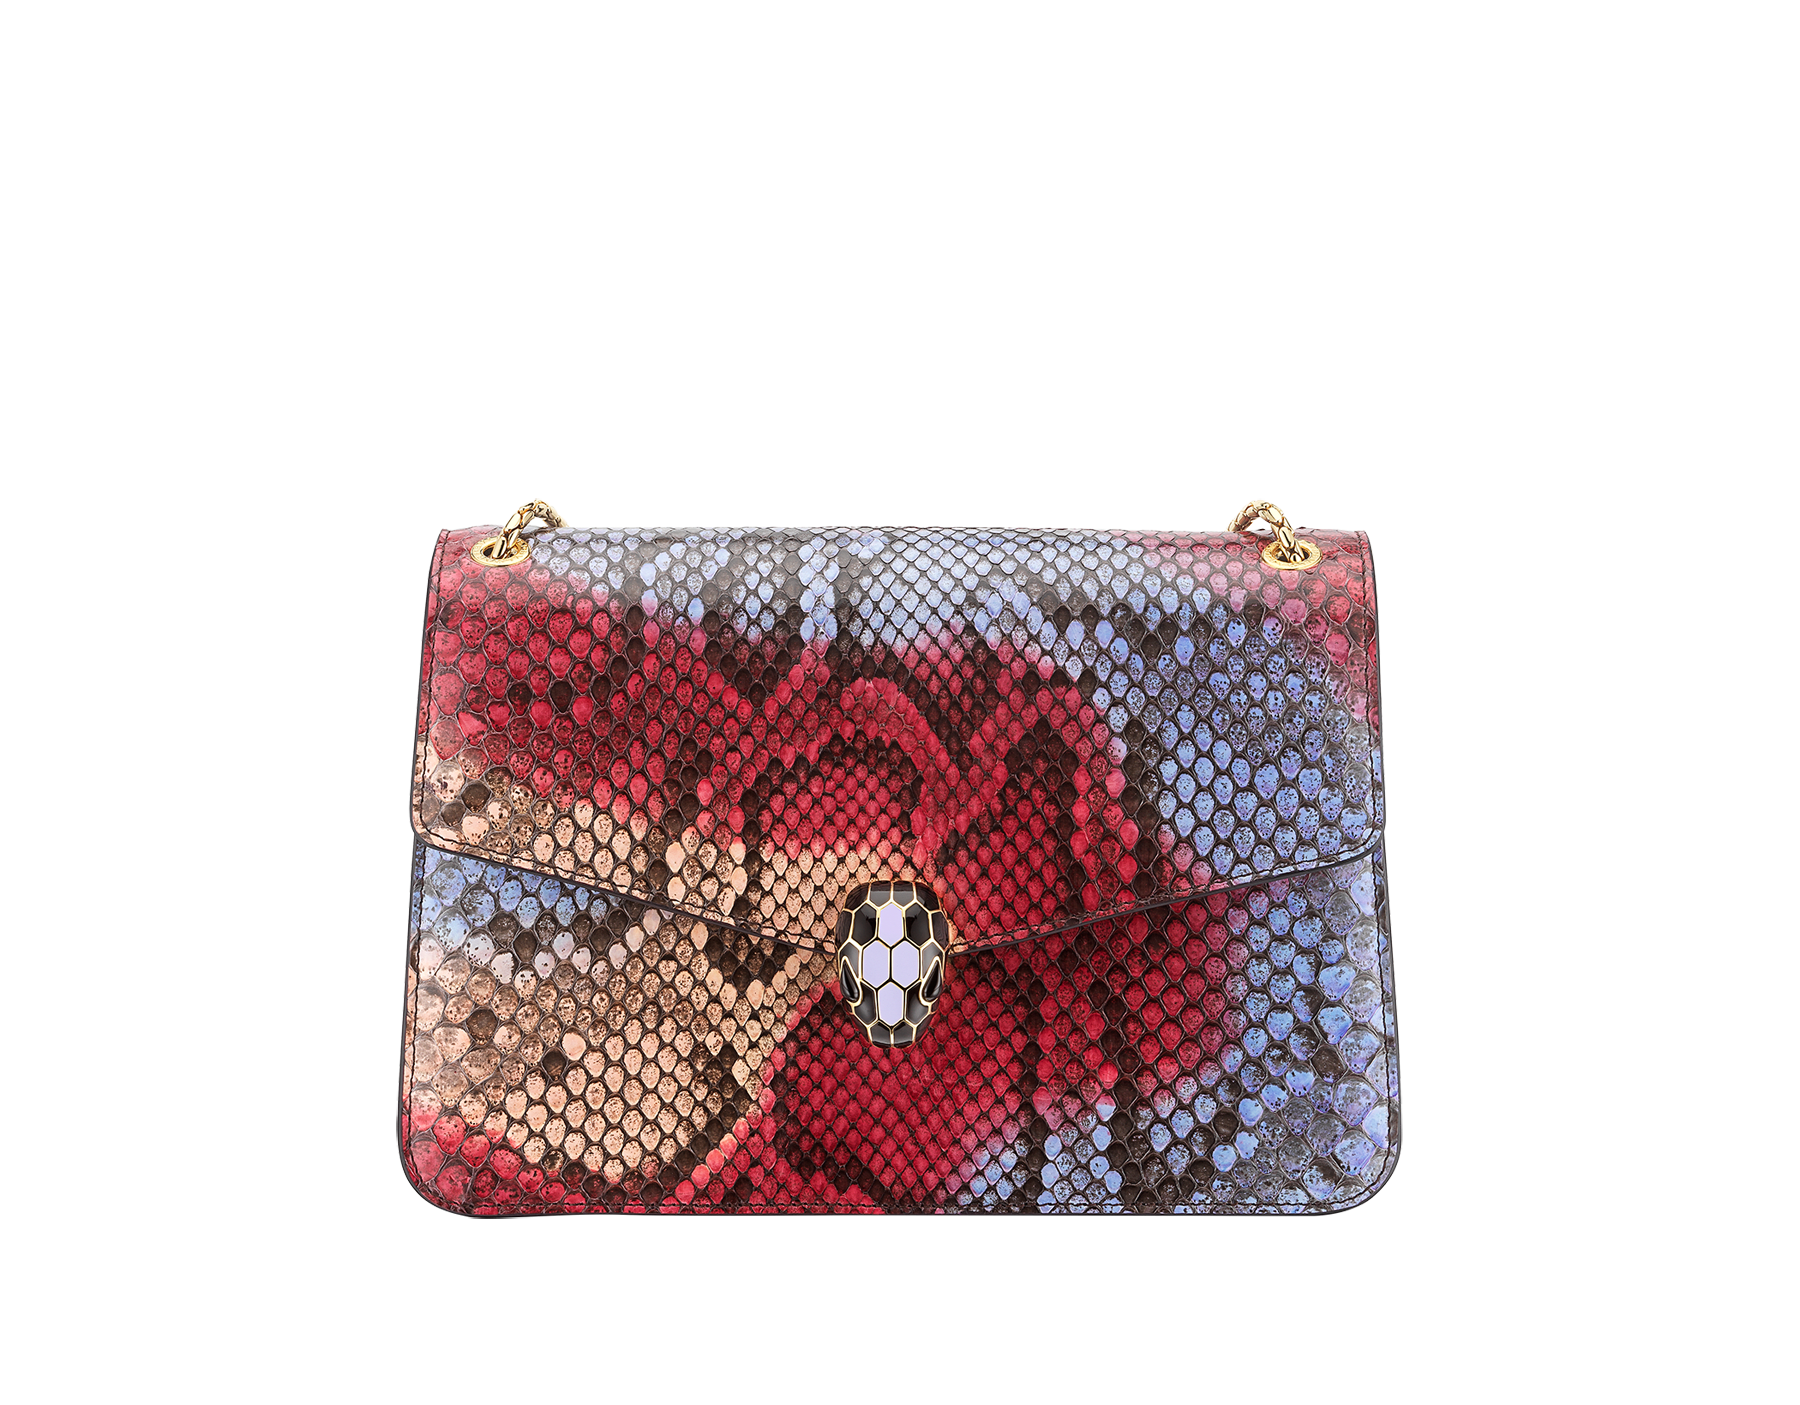 “Serpenti Forever” shoulder bag in multicolour "Chimera" python skin with Lavender Amethyst lilac nappa leather inner lining. Alluring snakehead closure in gold-plated brass enriched with black and Lavender lilac enamel, and black onyx eyes 290739 image 1